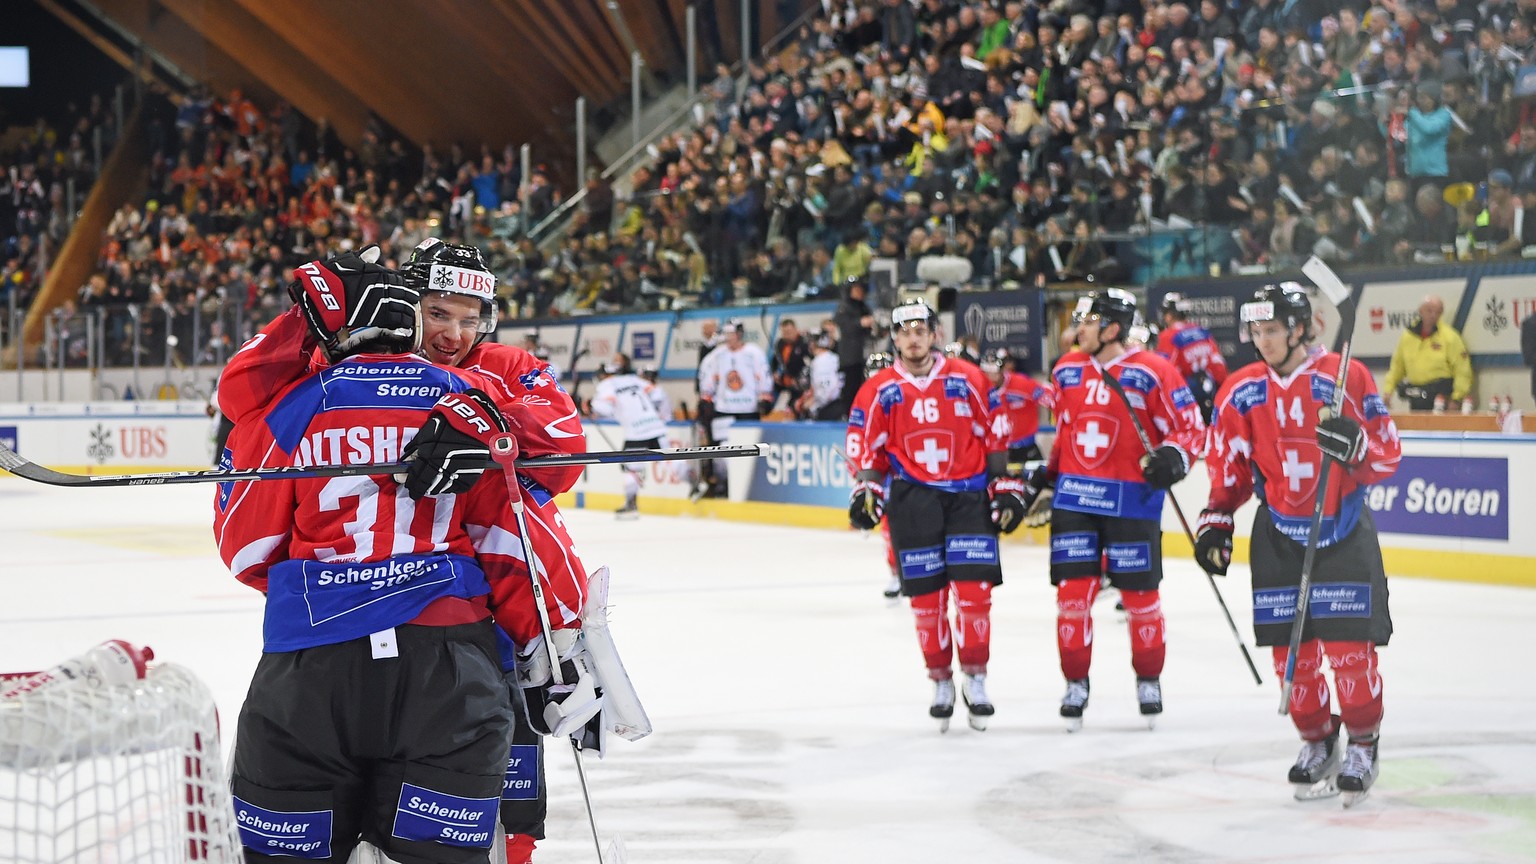 Team Suisse player Luca Boltshauser, Yannick Rathgeb and the team celebrate after the game between Team Suisse and Haemeenlinna PK at the 91th Spengler Cup ice hockey tournament in Davos, Switzerland, ...